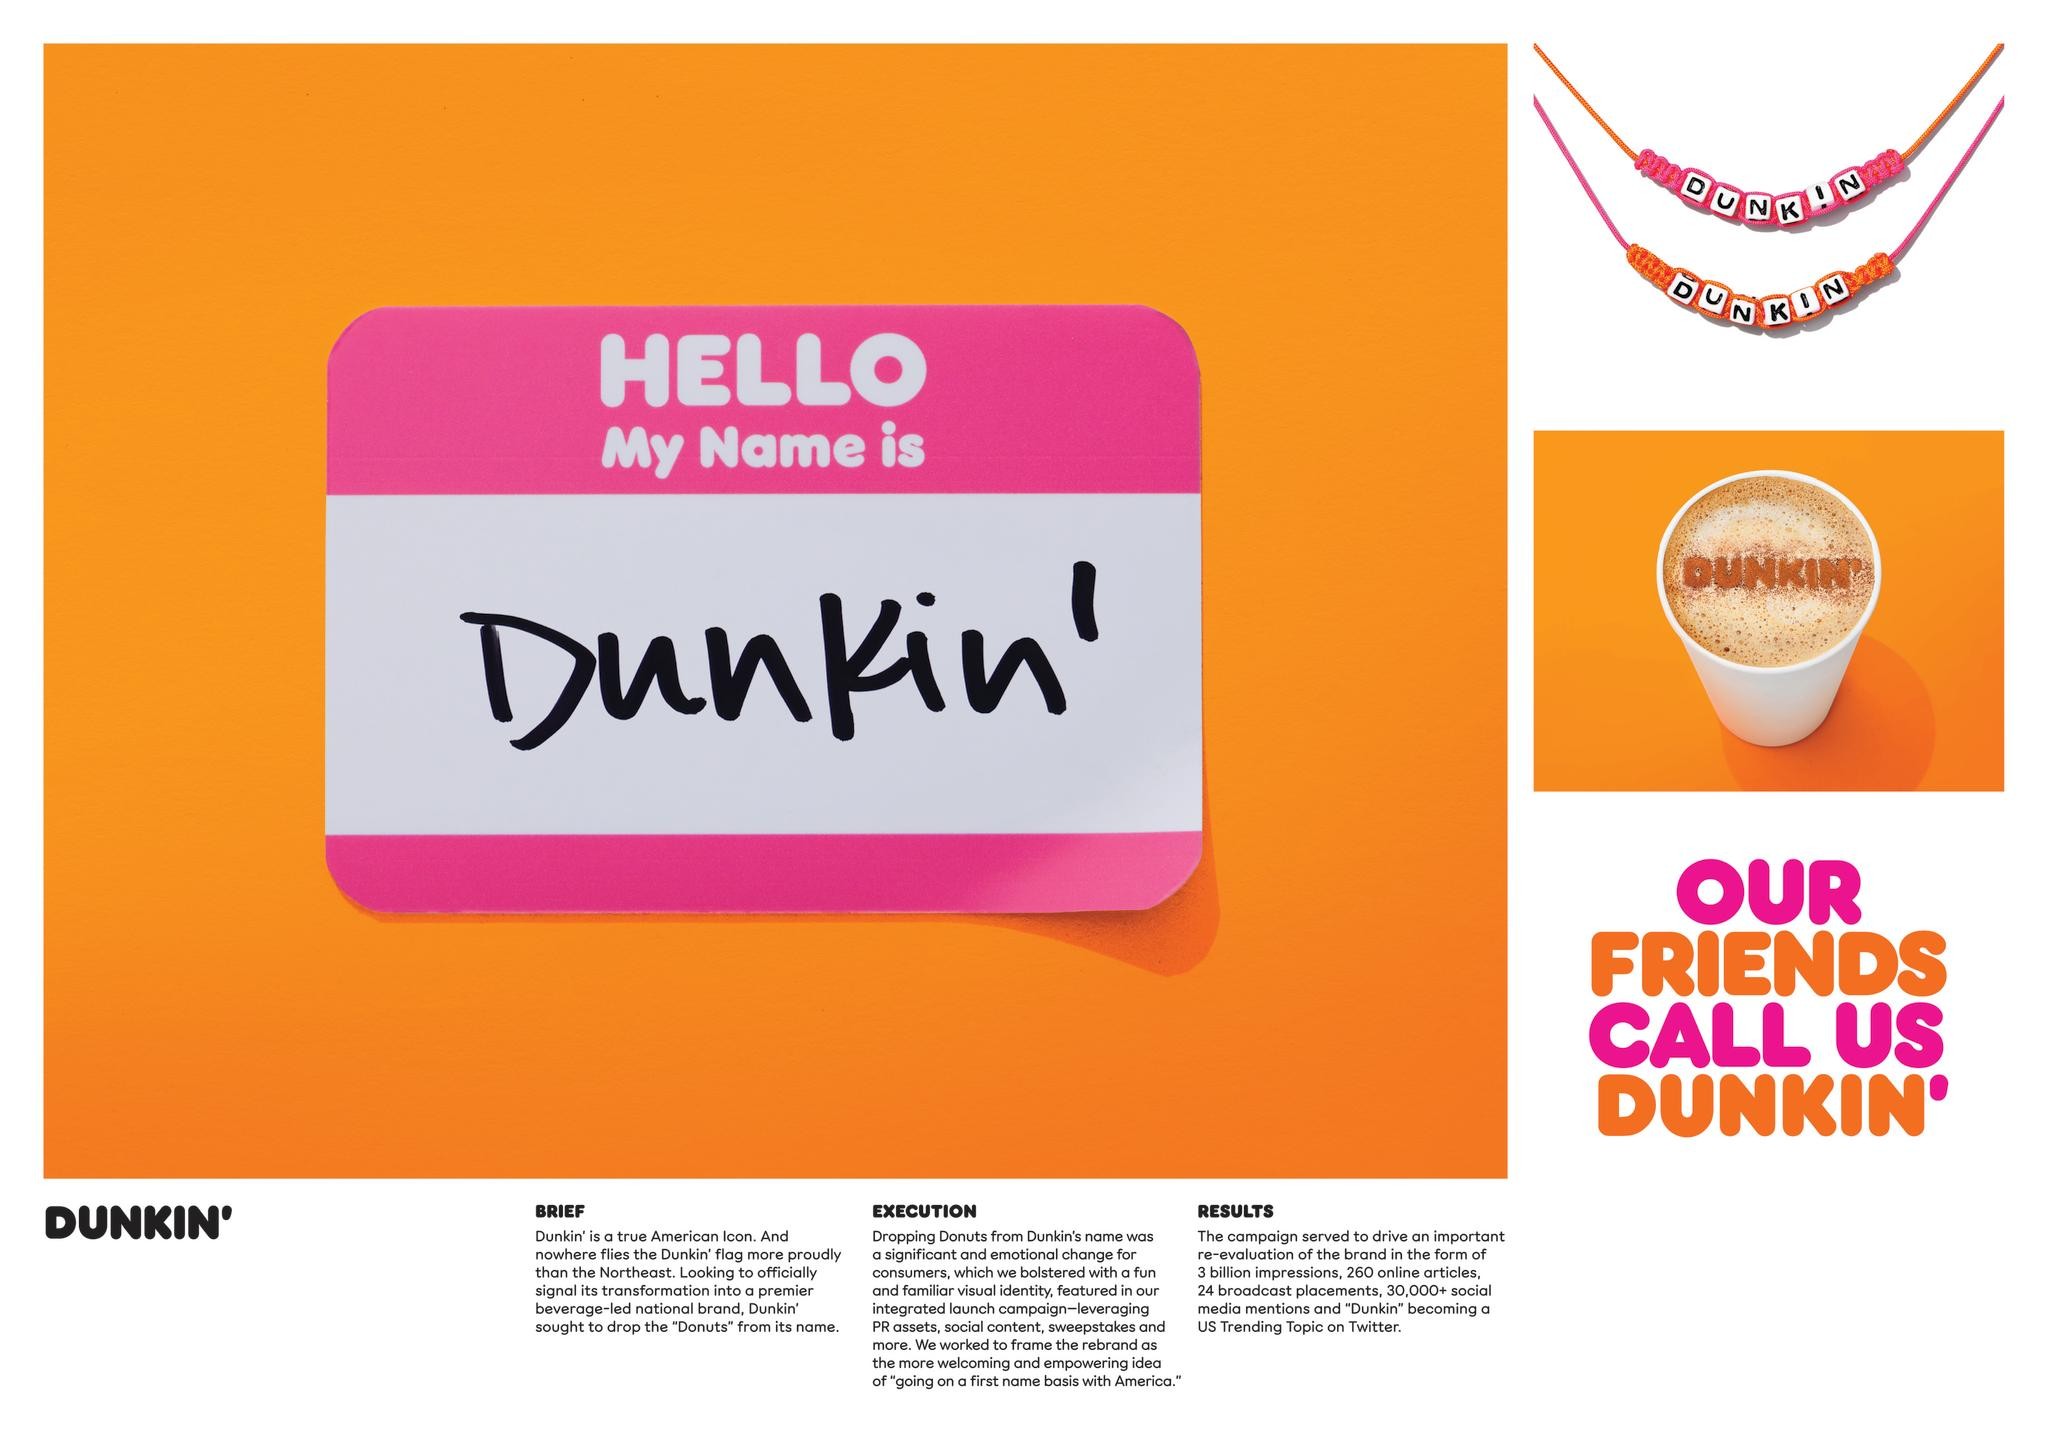 Dunkin' First Name Basis Campaign